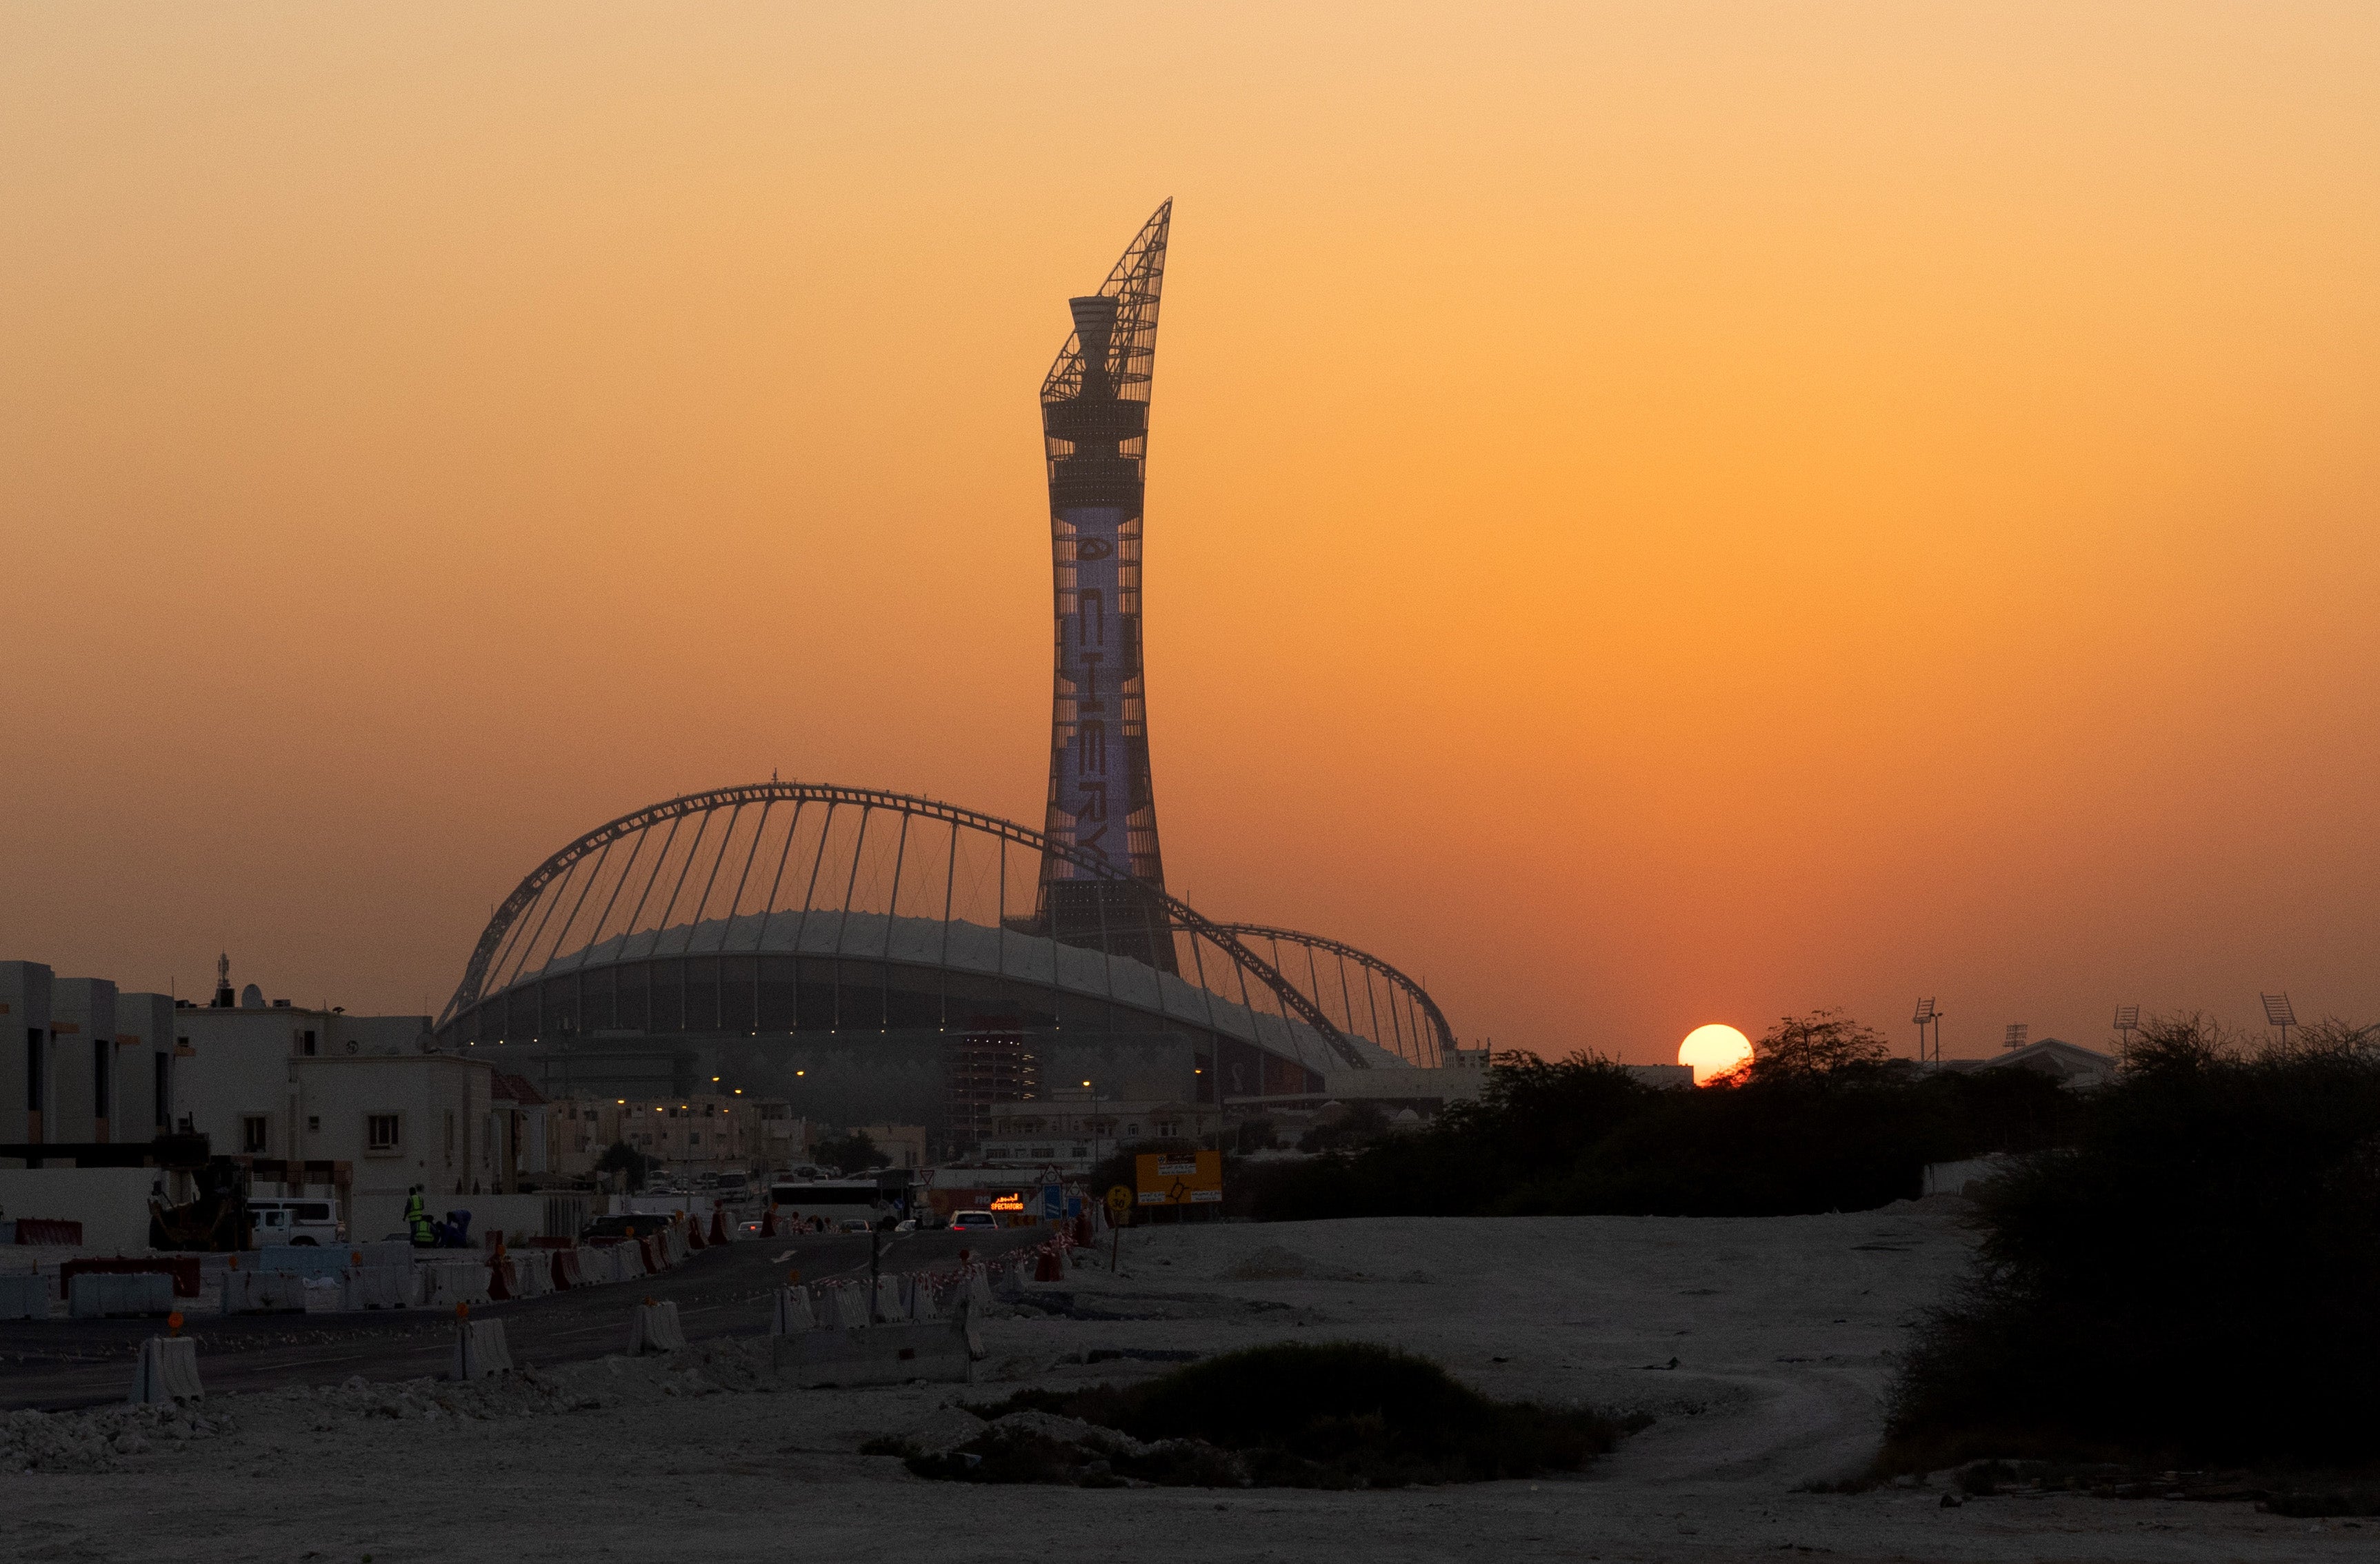 The Khalifa stadium and the Torch Tower are located in an area of Doha that resonates with tragedy